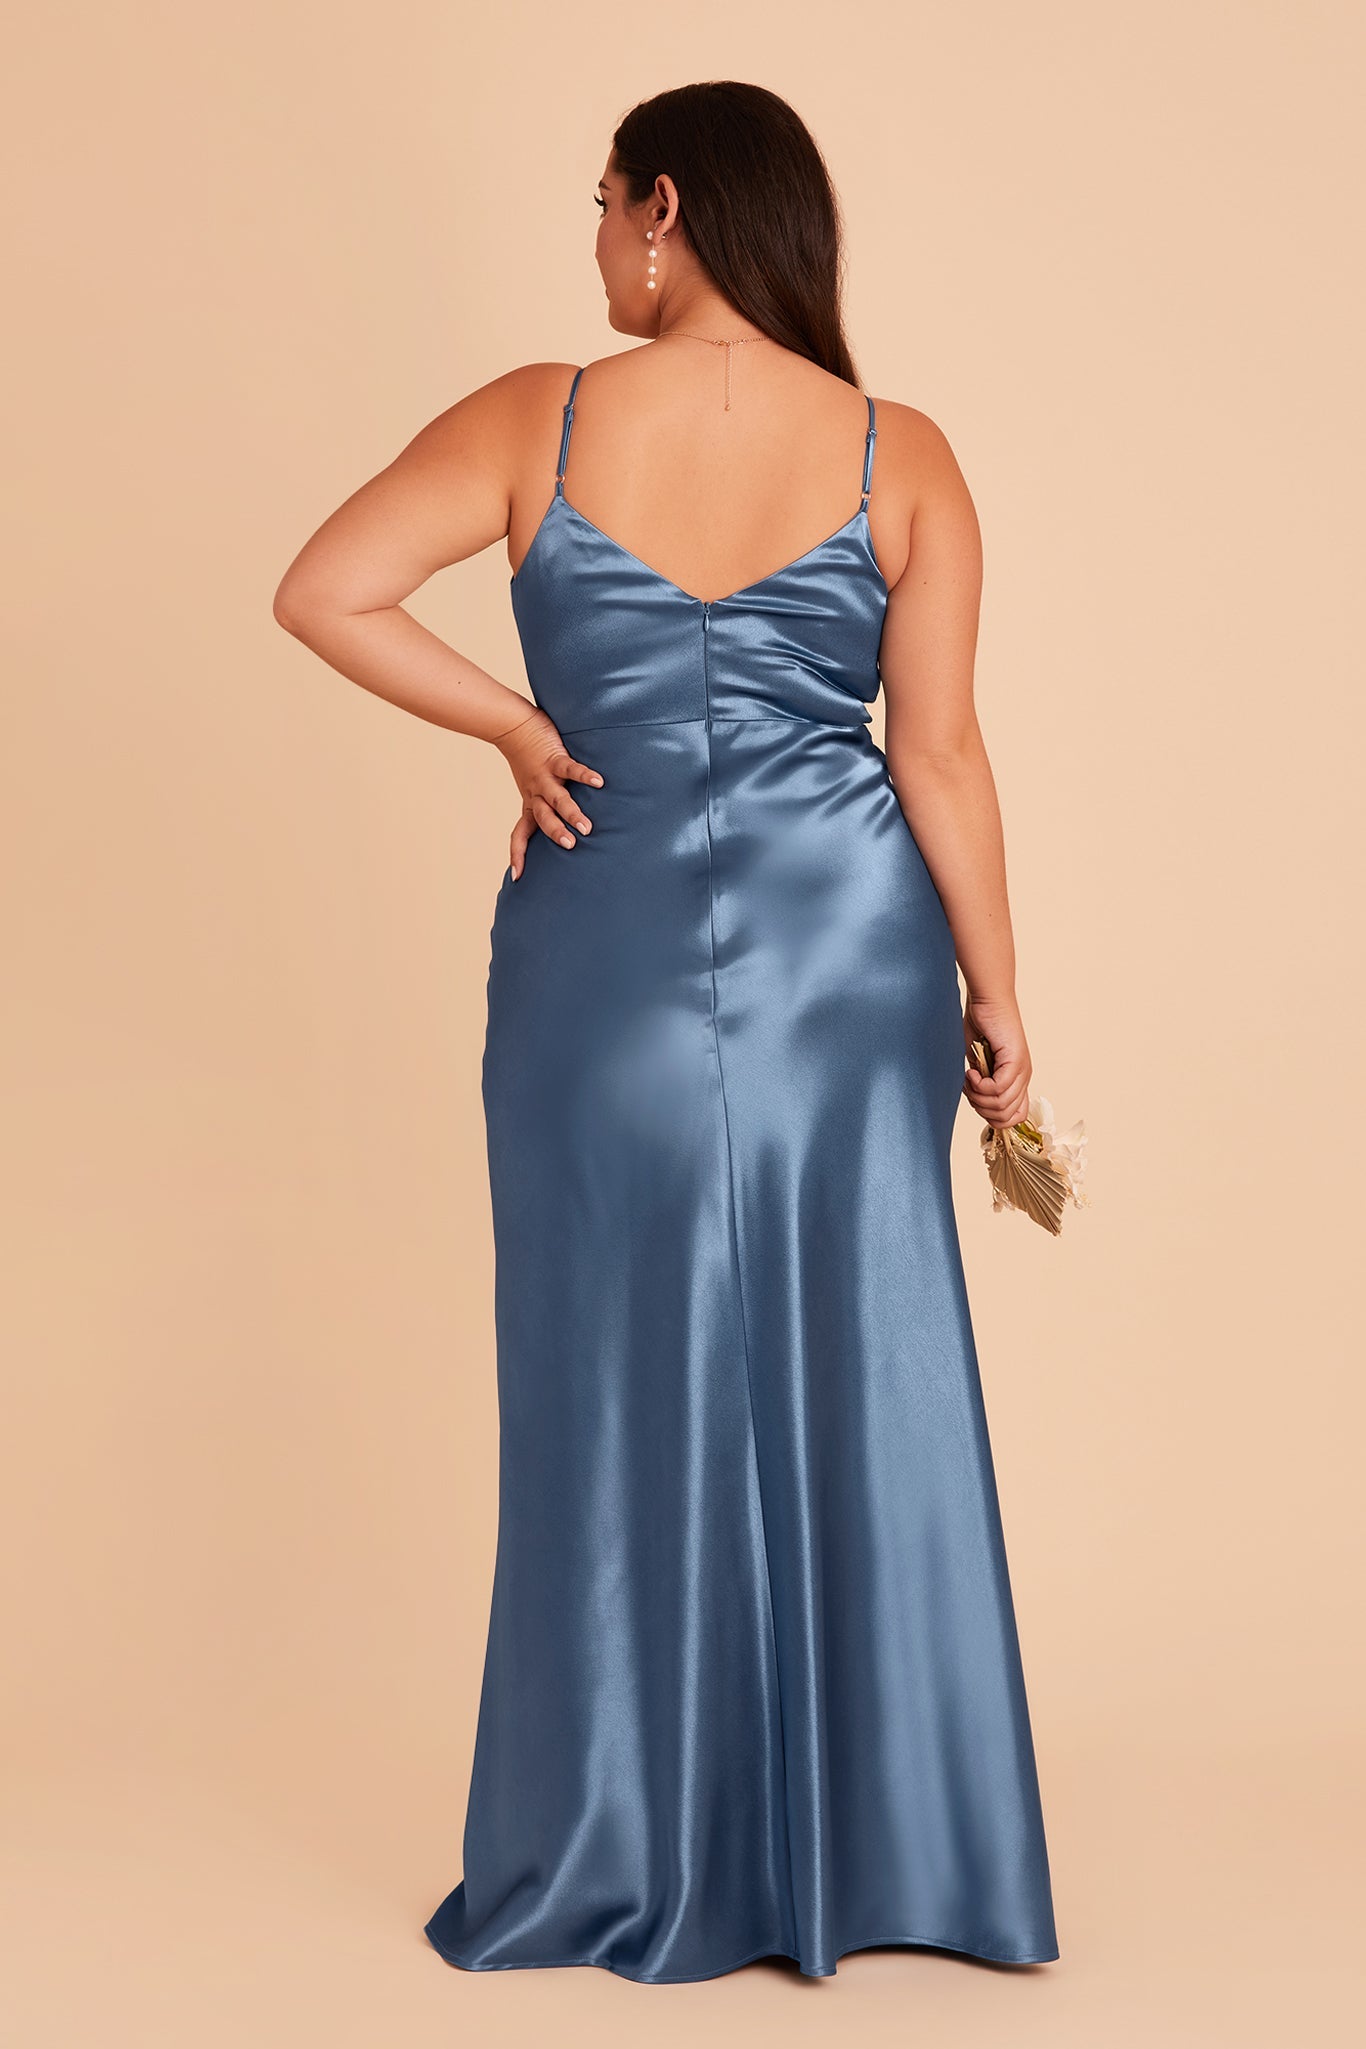 Jay plus size bridesmaid dress with slit in twilight satin by Birdy Grey, back view